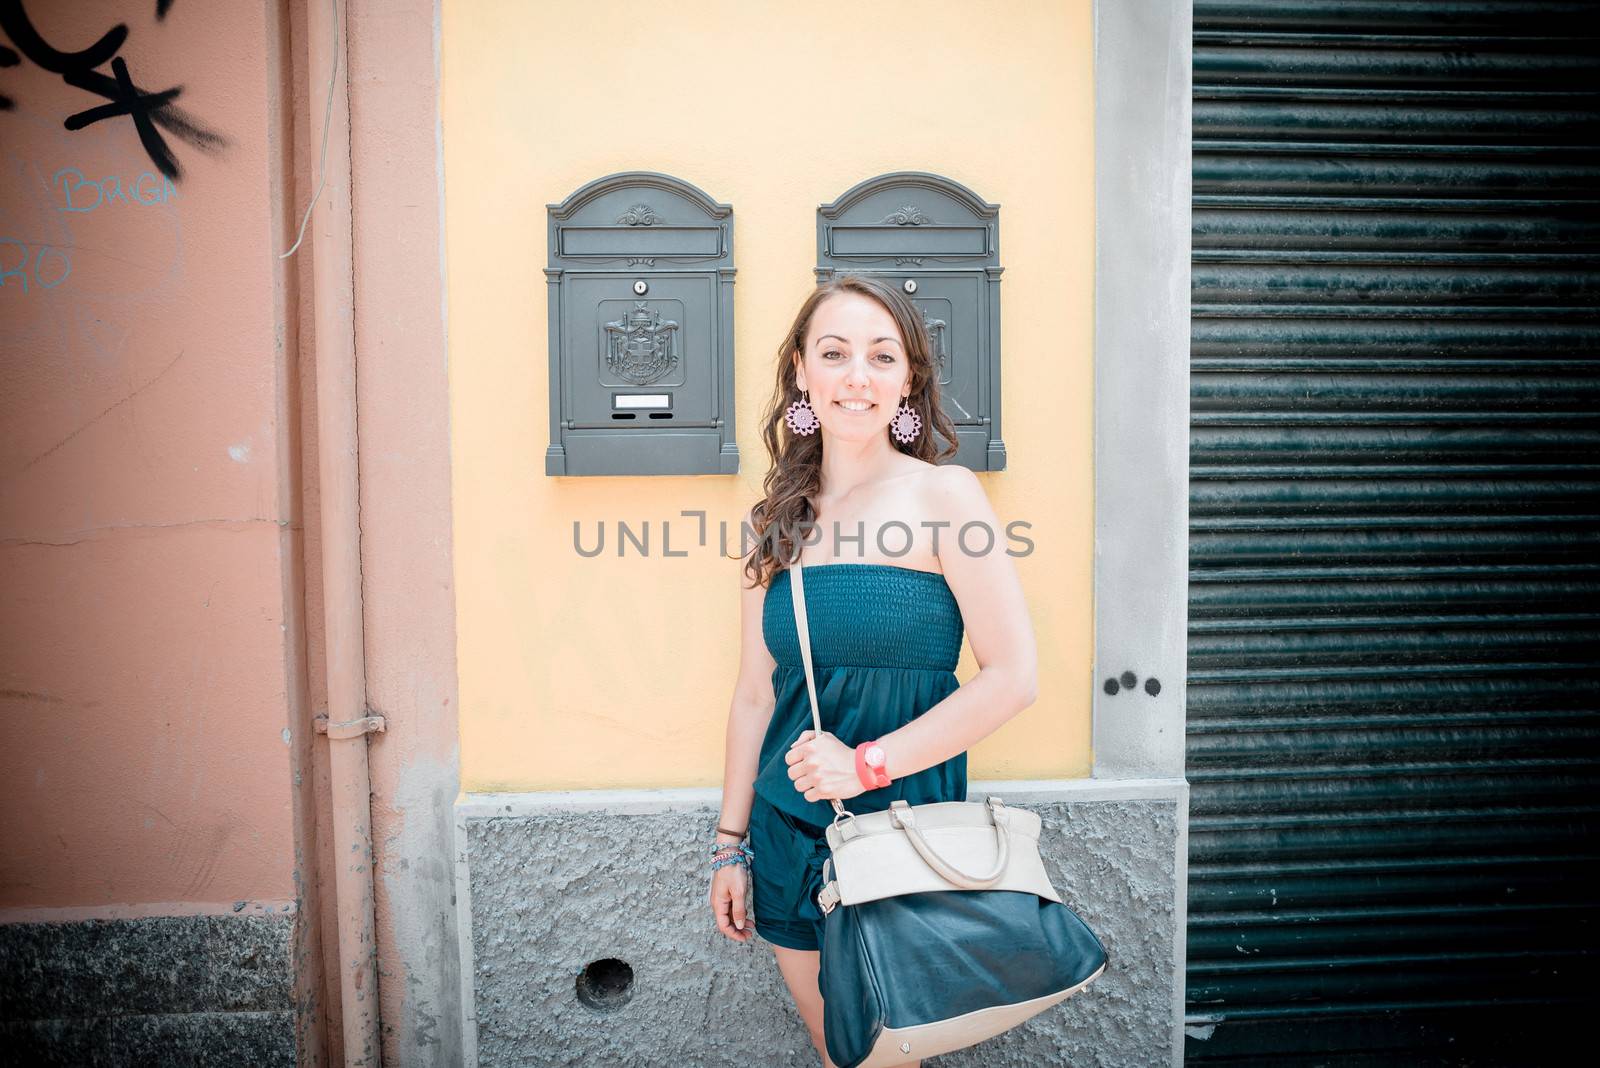 beautiful woman in the city smiling